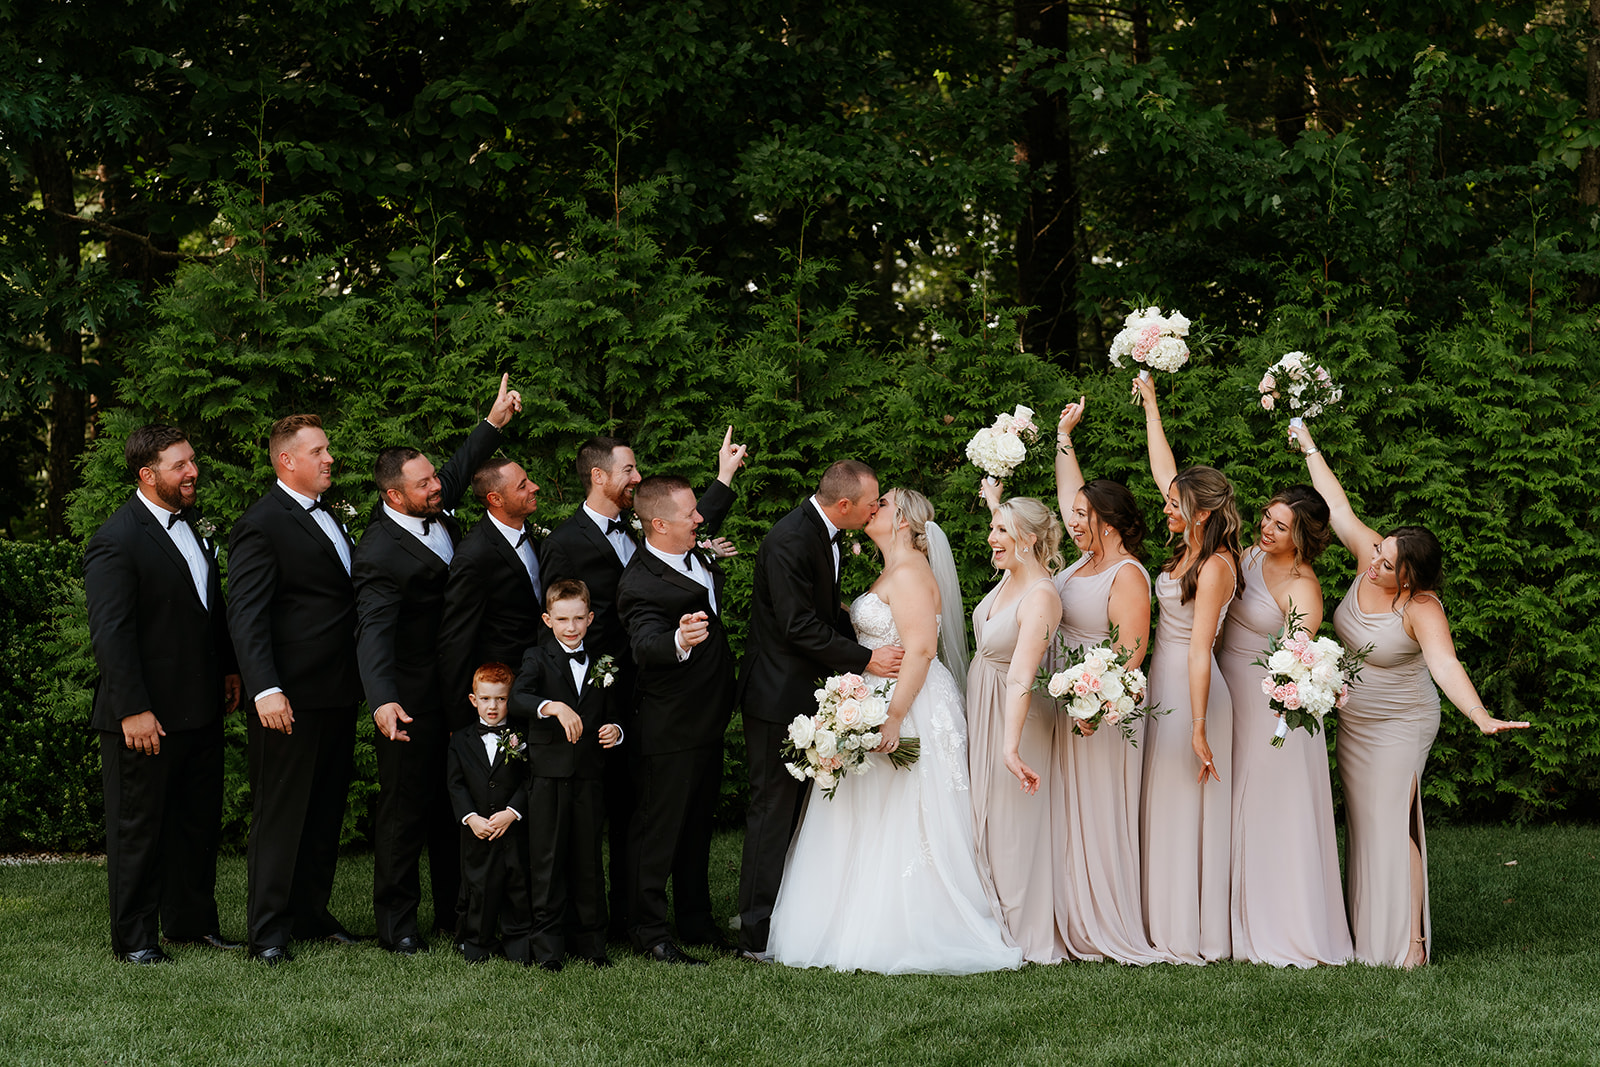 A wedding party posing outdoors, with a groom kissing the bride while the rest of the group, dressed in formal attire, engages in various playful gestures.